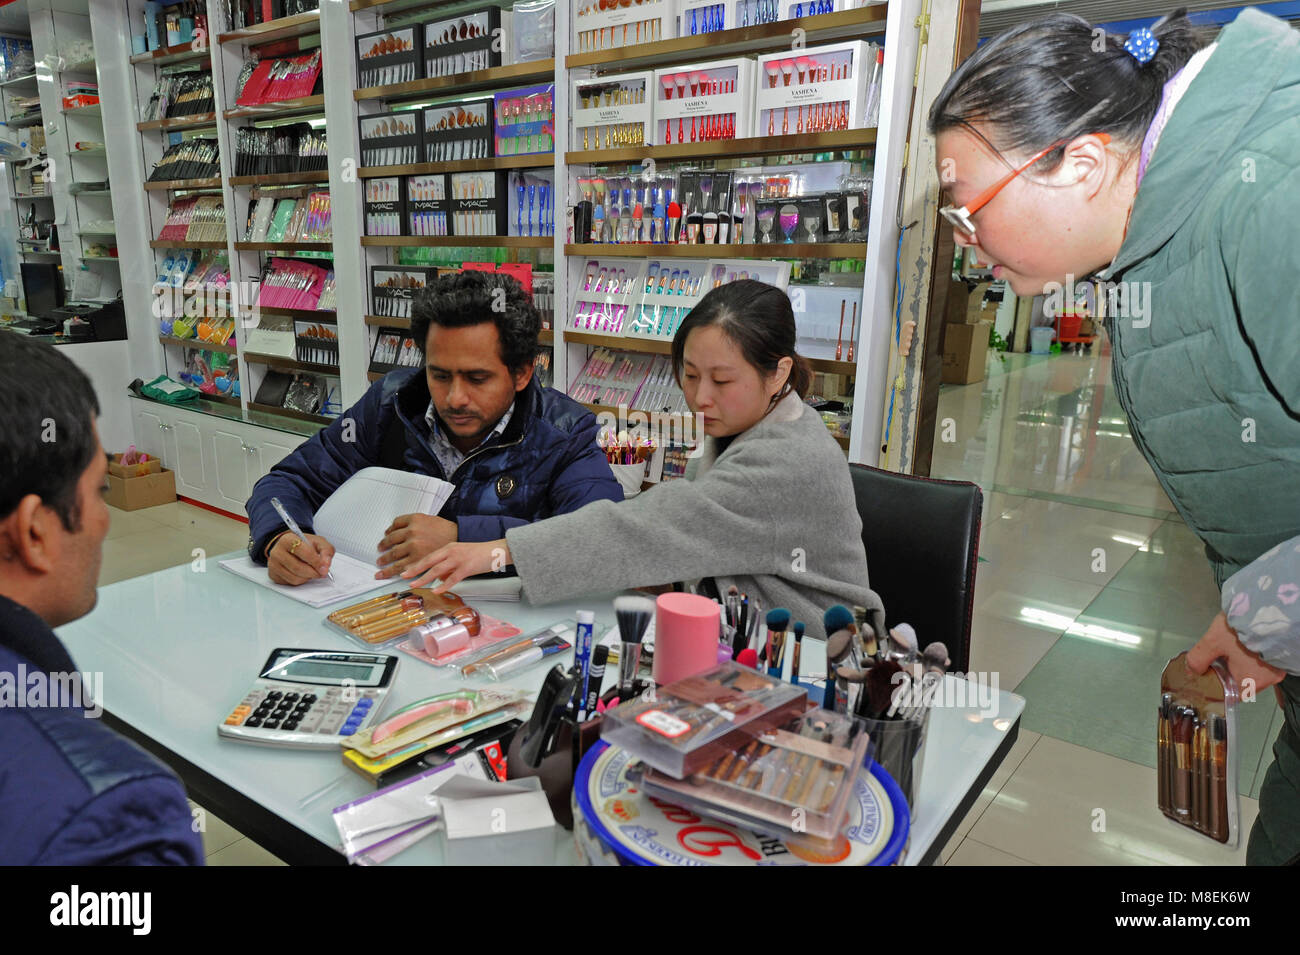 (180317) -- YIWU, March 17, 2018 (Xinhua) -- An Indian businessman (2nd L) checks the purchase list at the international shopping mall in Yiwu, a city specialized in small goods trade in east China's Zhejiang Province, Jan. 4, 2018. Zhejiang's trade with countries and regions related to China's Belt and Road Initiative reached 149.89 billion yuan (23.68 billion U.S. dollars) in the first two months of 2018, growing 37.3 percent year on year and accounting for 11.9 percent of China's total, according to the latest figures issued by the Hangzhou Customs. (Xinhua/Tan Jin) (ry) Stock Photo